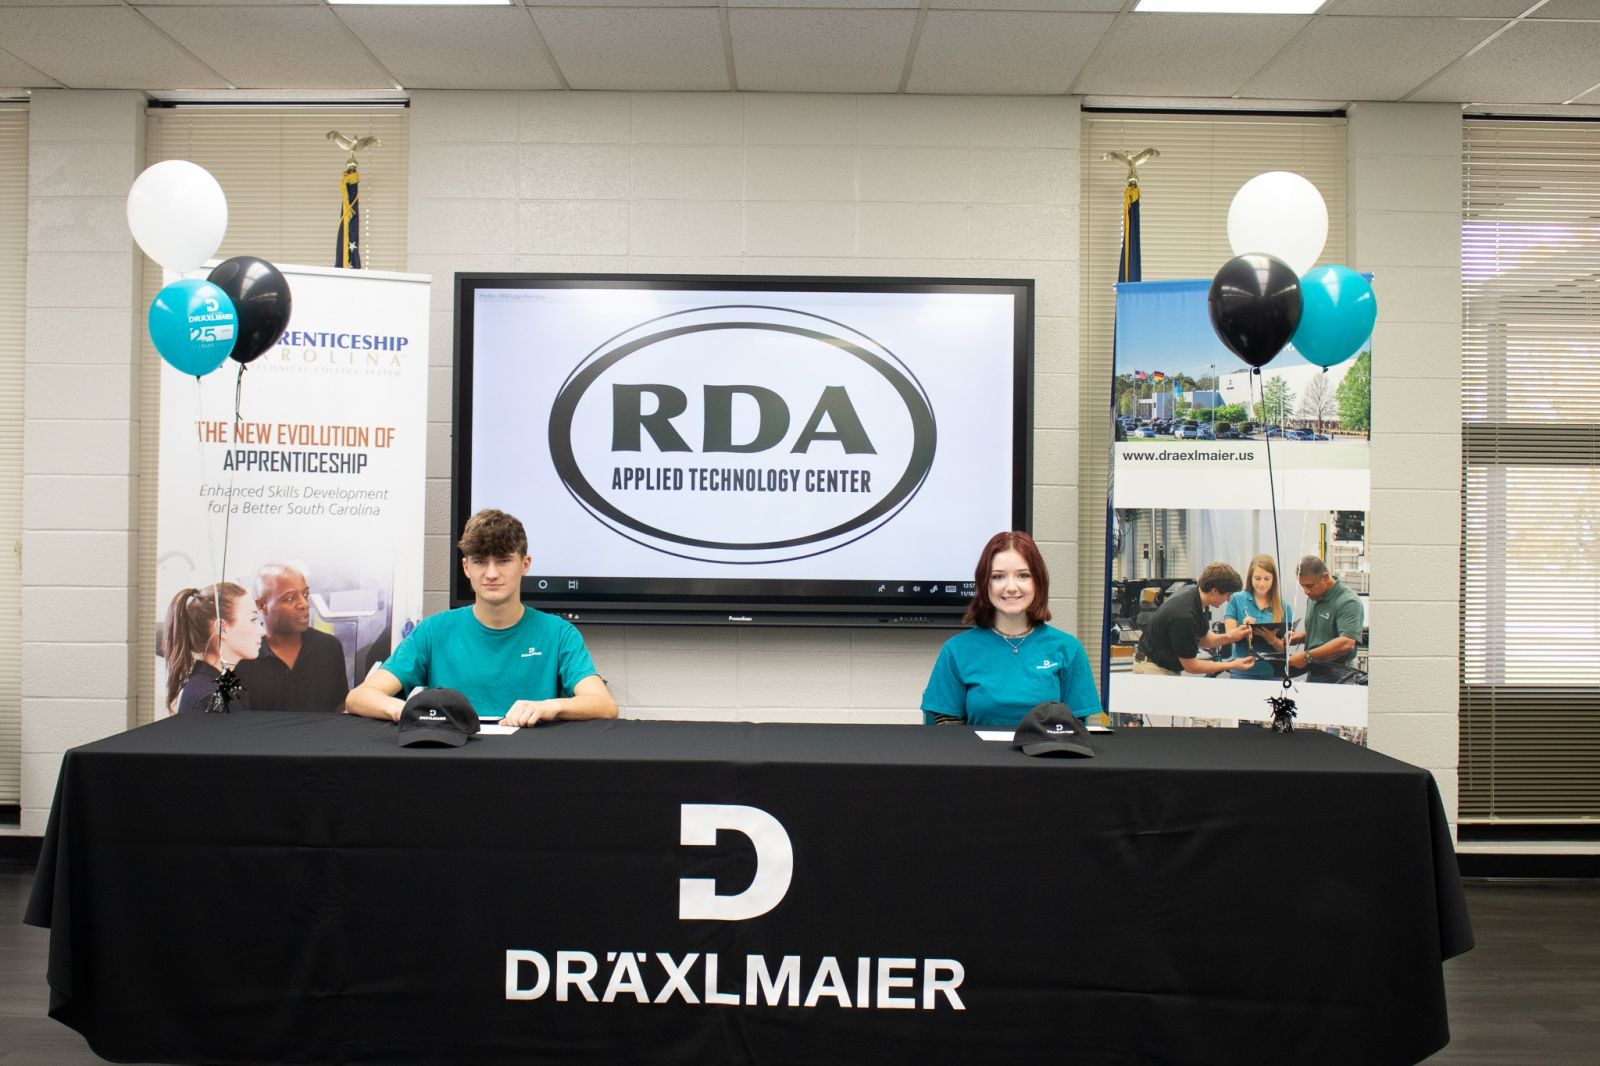 Machine tool apprentice Ivan Kurpis and mechatronics apprentice Evelyn Atkins signed on to a three-year commitment at the company's Duncan plant last week. (Photo/Provided)